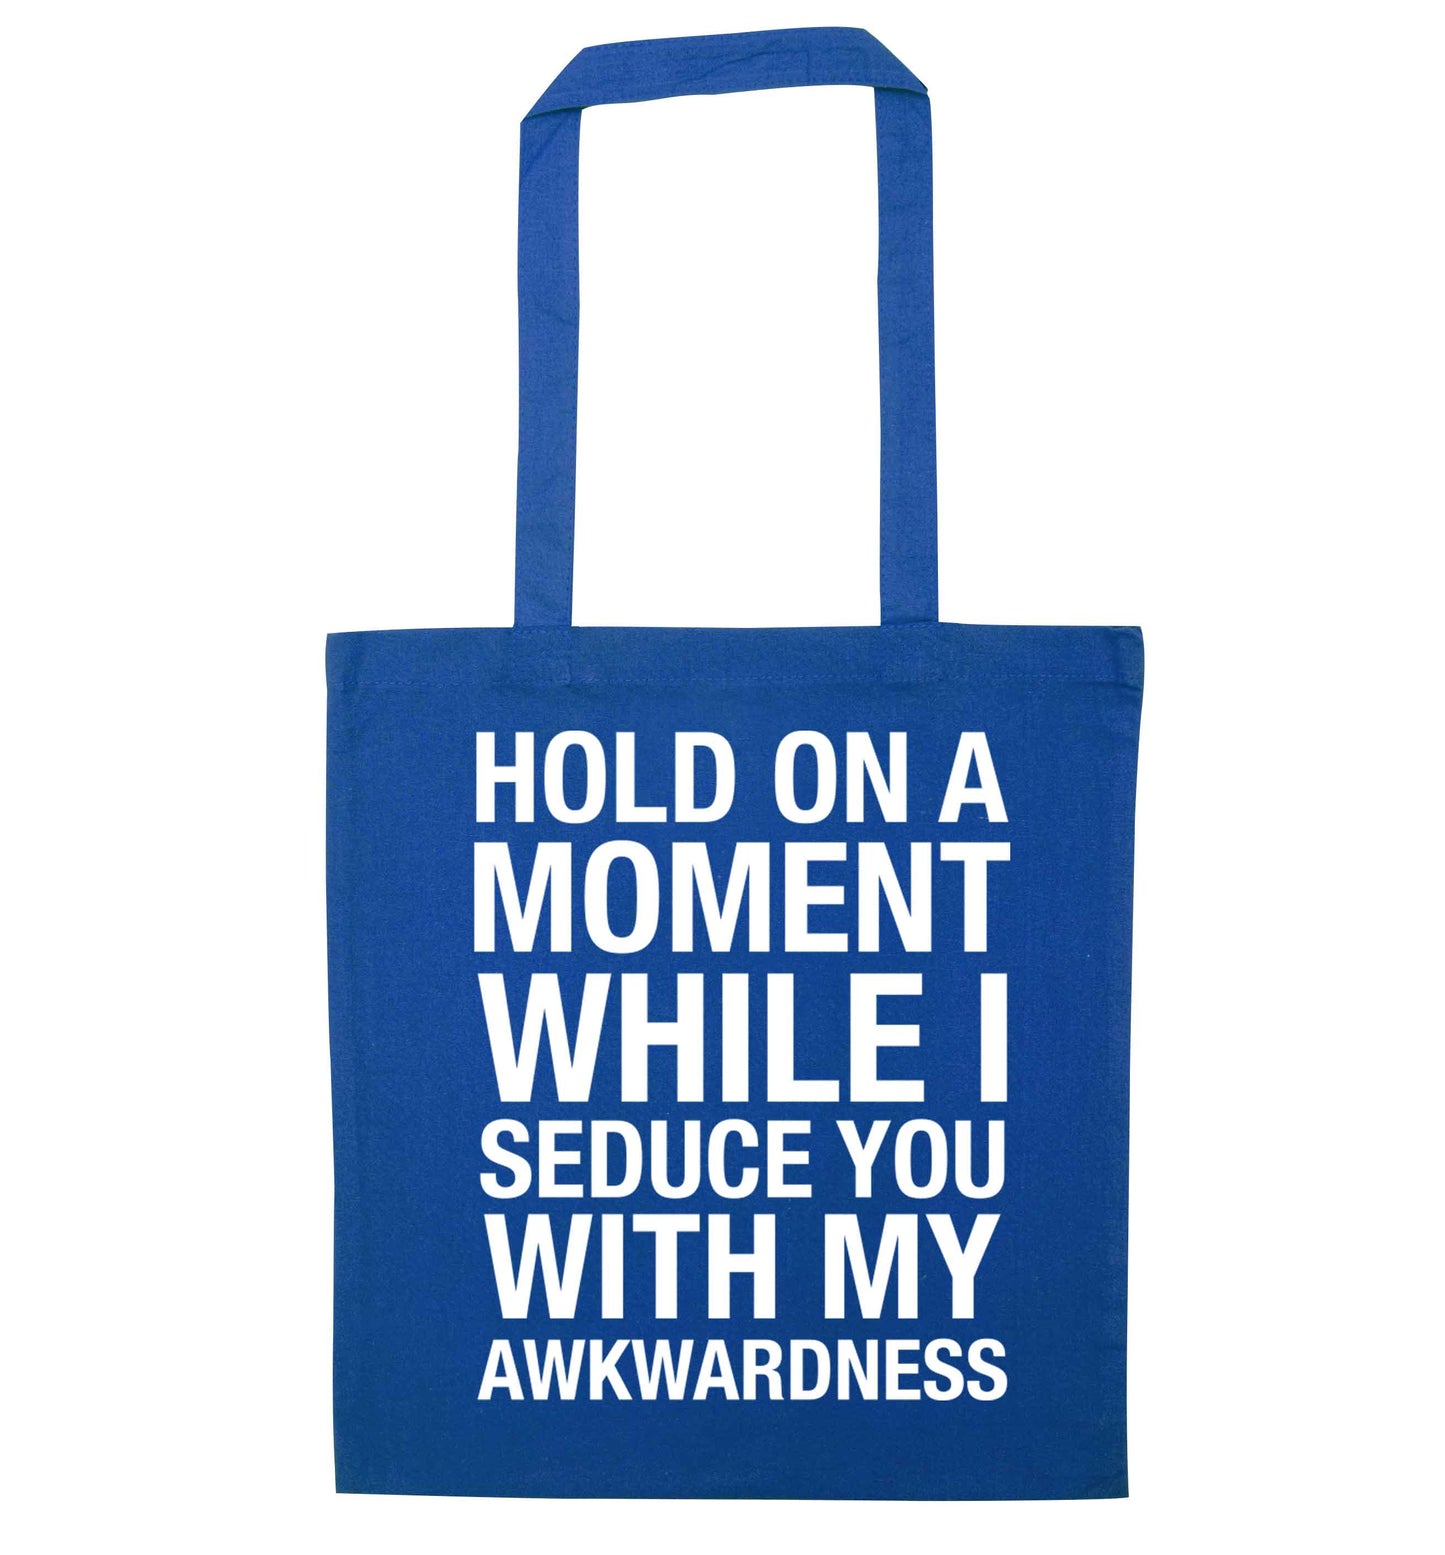 Hold on a moment while I seduce you with my awkwardness blue tote bag